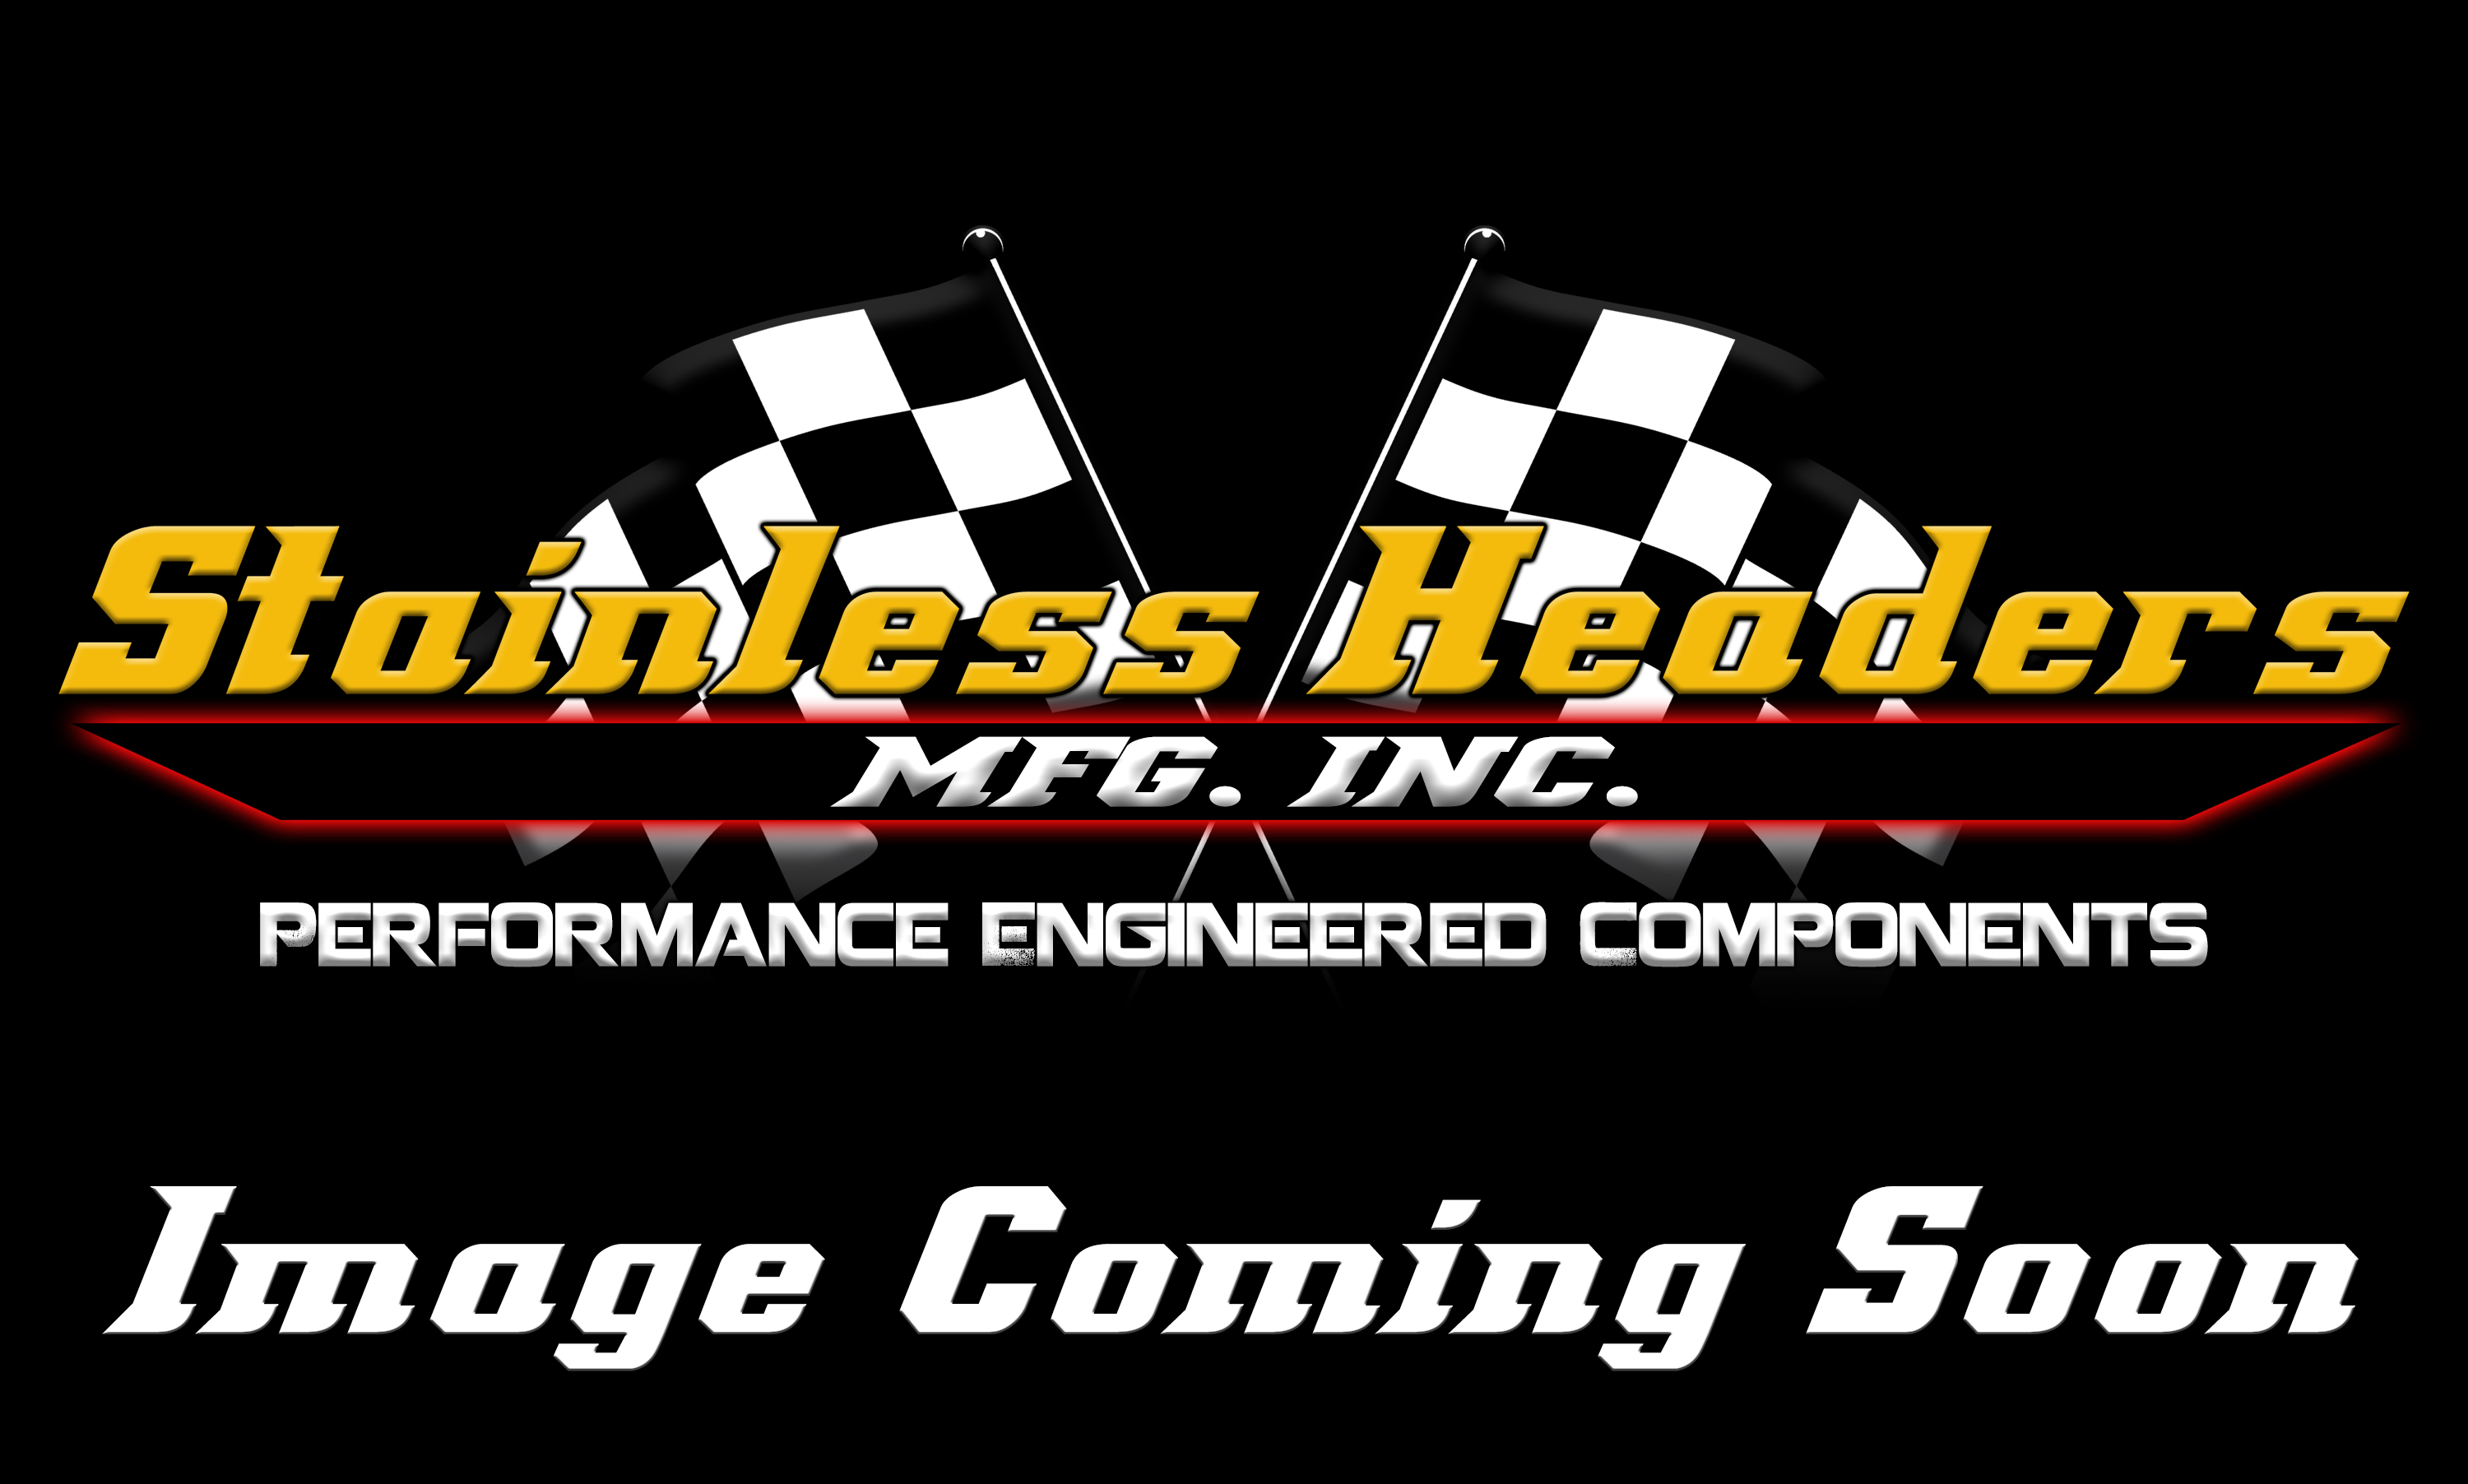 Stainless Headers - 5" Bore Space Big Block Chevy Turbo Manifold Build Kit - Image 2